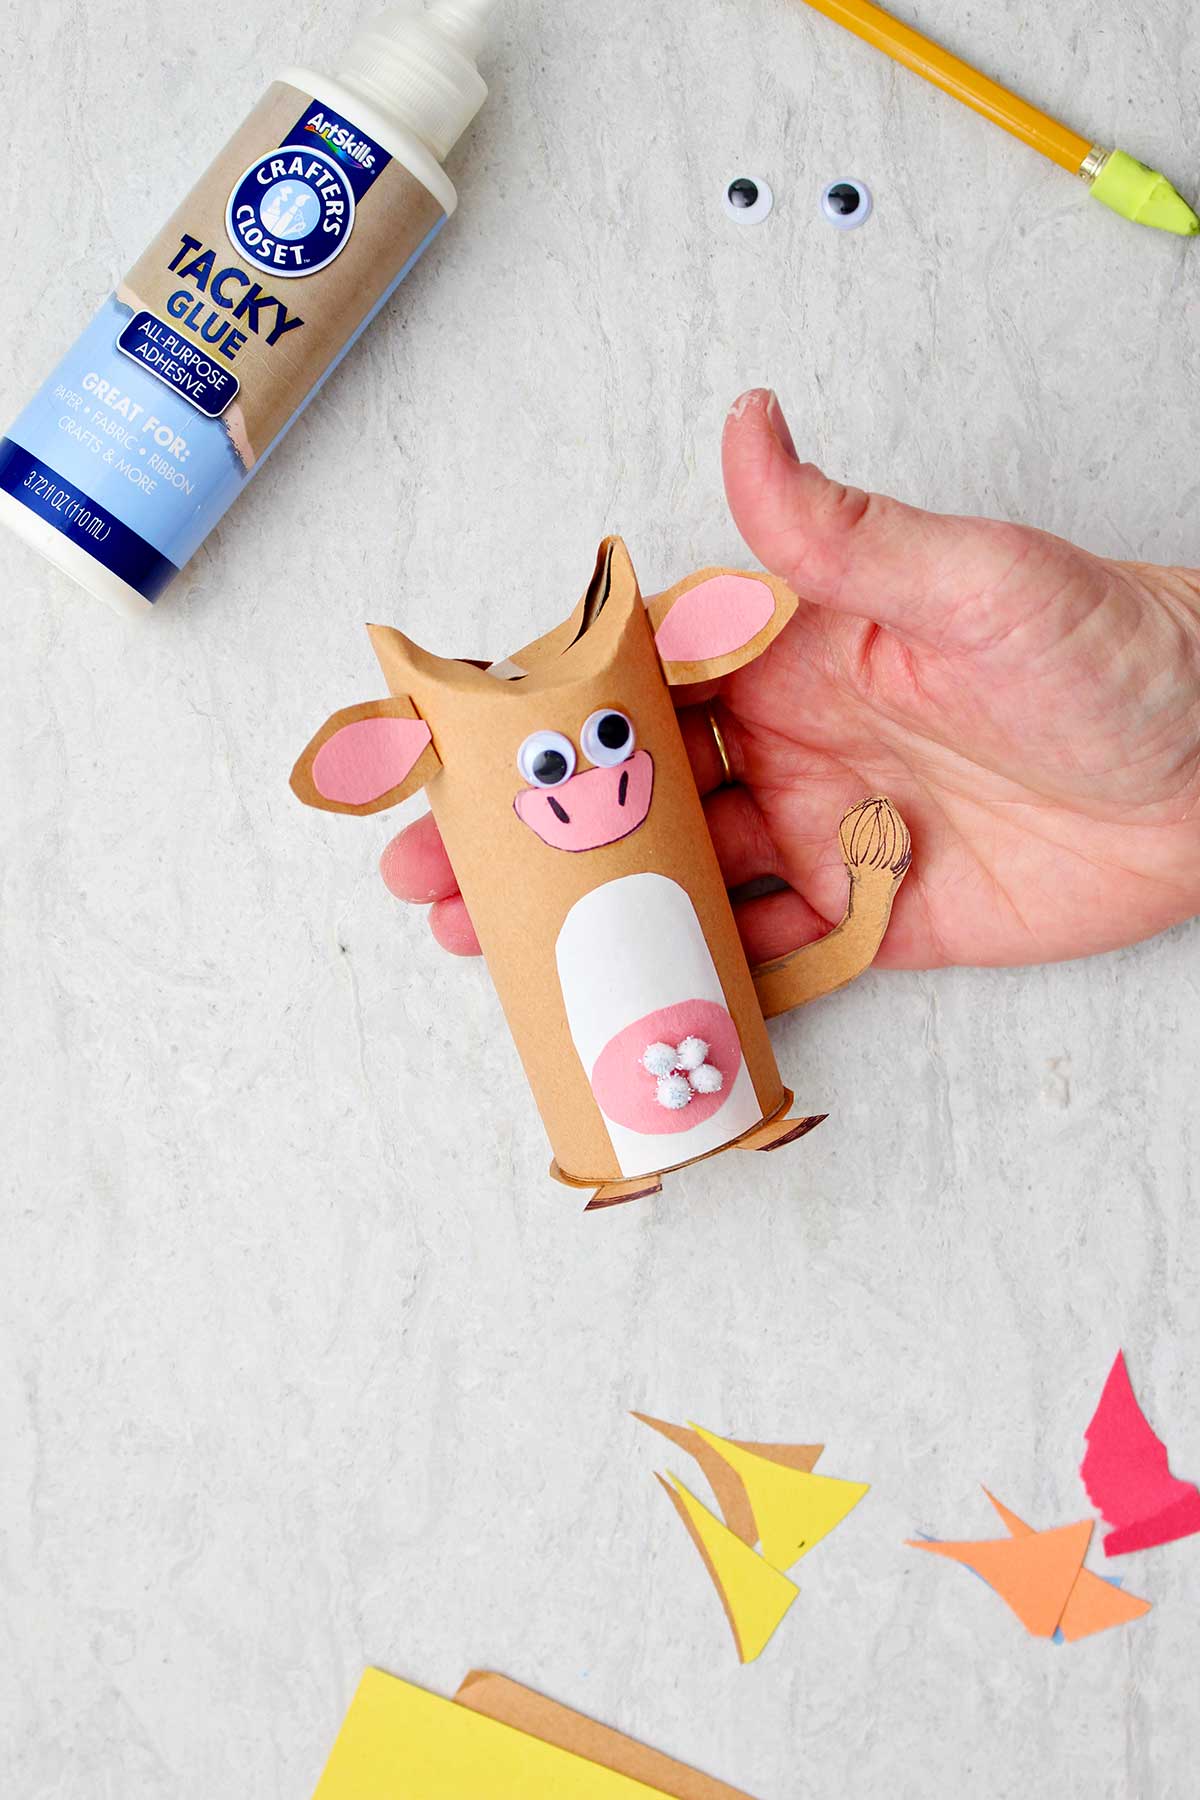 Hand holding cow toilet paper roll animal.